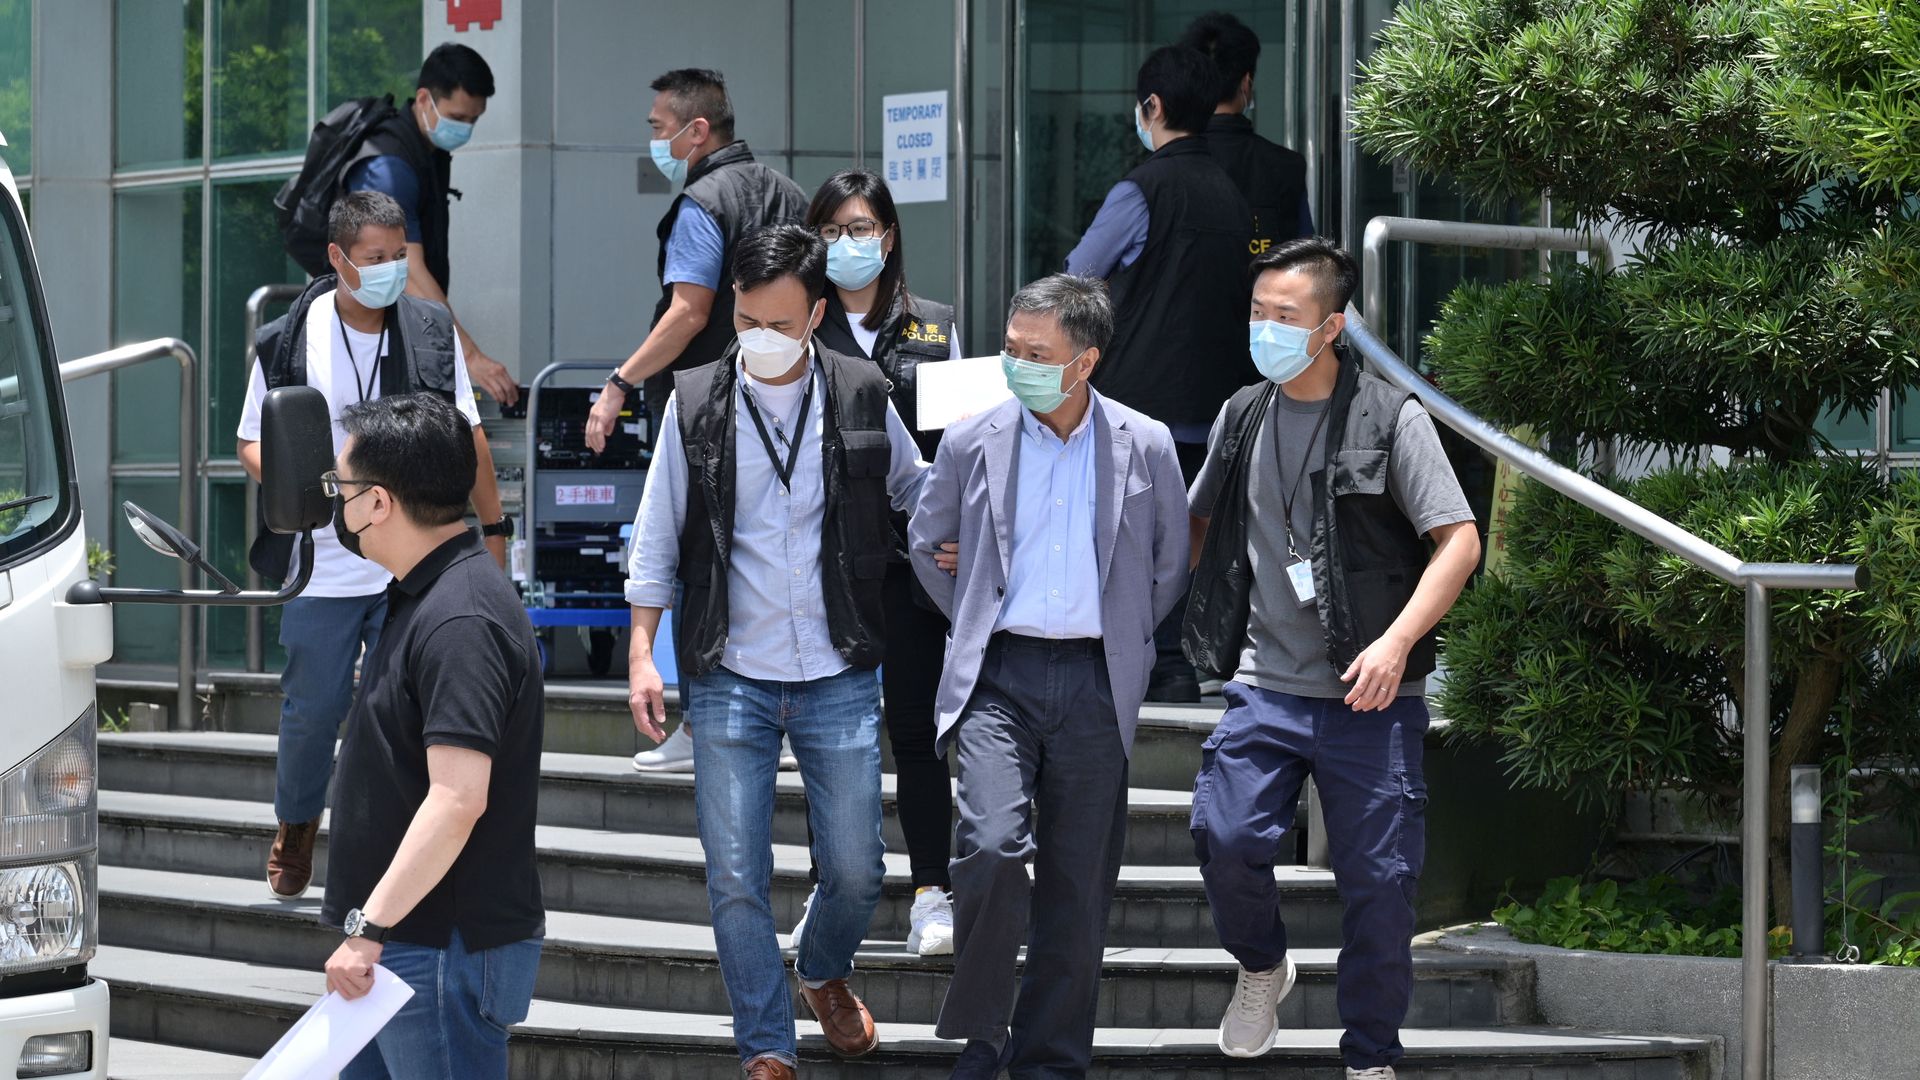  Chief Operations Officer Chow Tat Kuen (front 2nd R) is escorted by police from the Apple Daily newspaper offices before being put into a waiting vehicle in Hong Kong on June 17